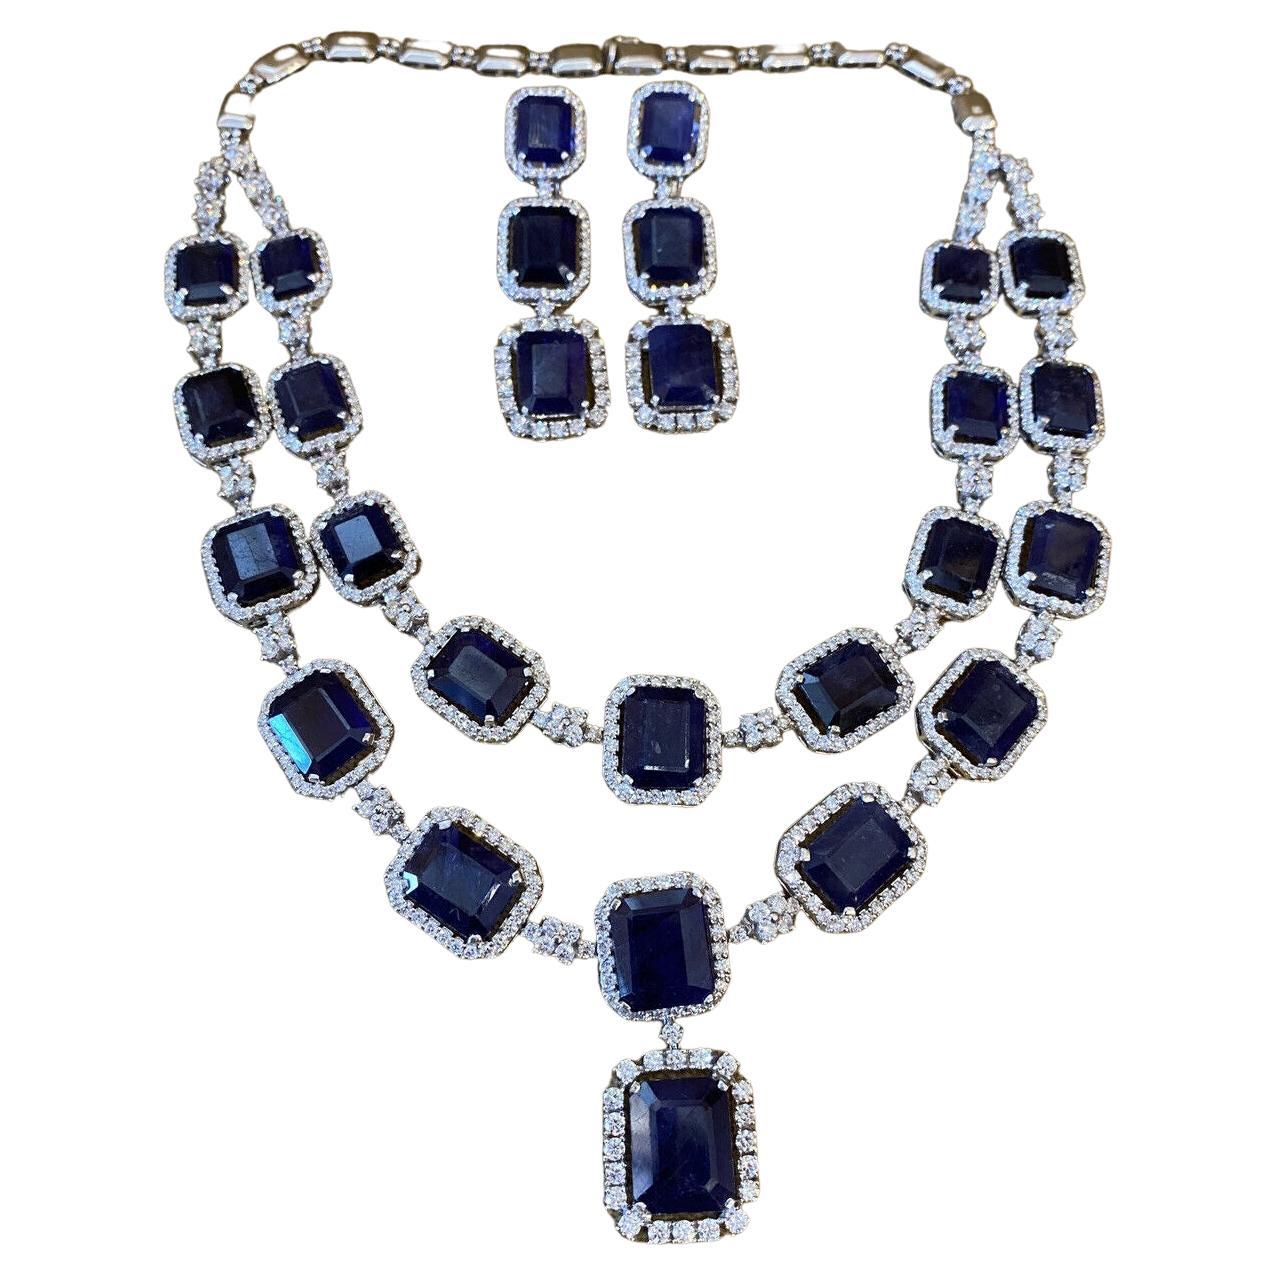 Large Sapphire and Diamond Necklace and Earring Suite in 18k White Gold